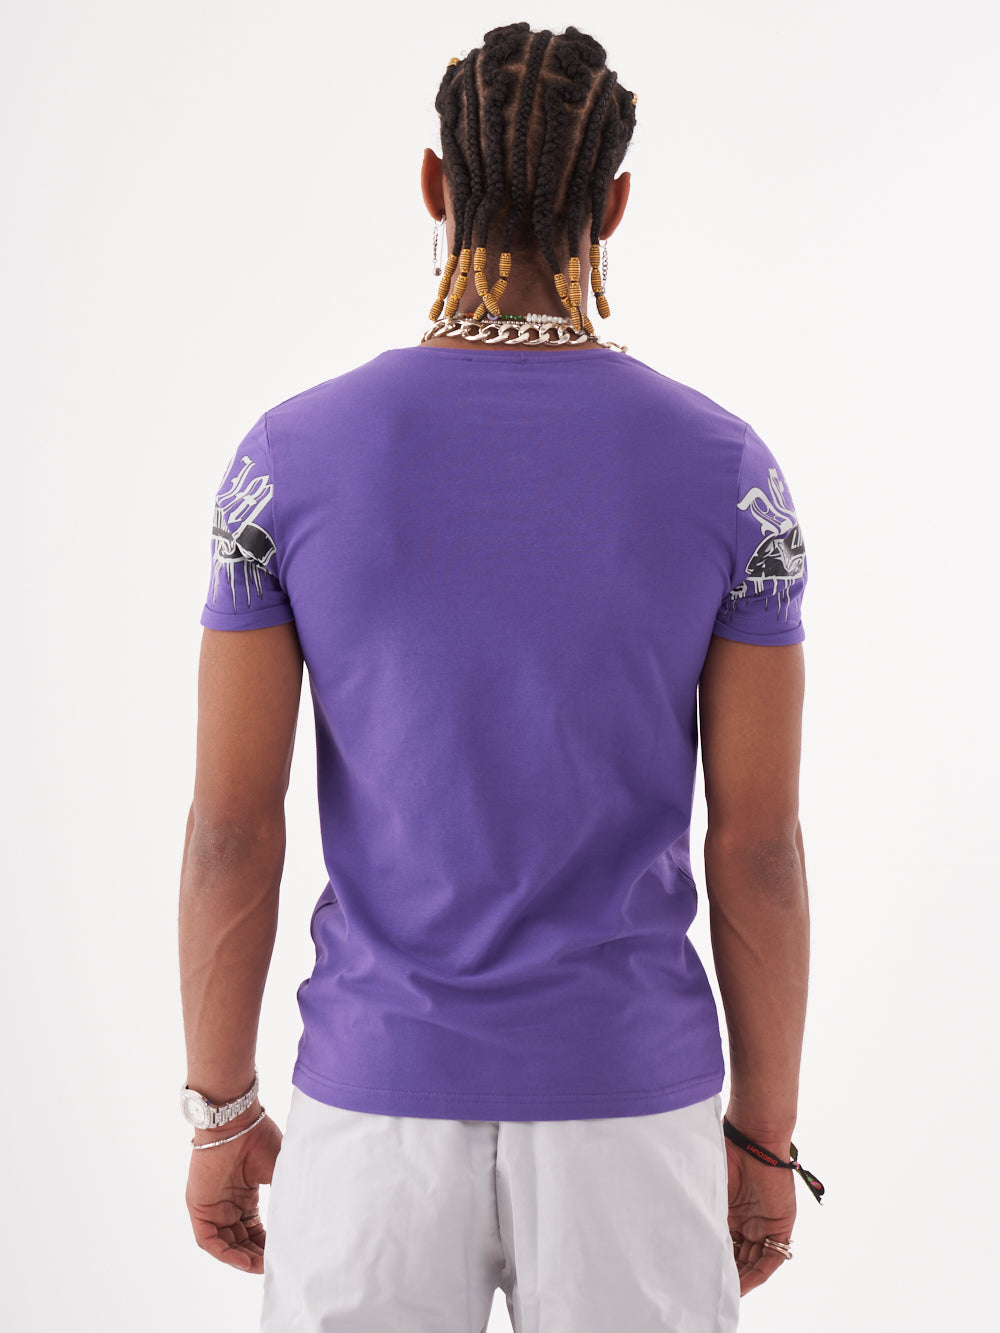 The back view of a man wearing a SKULL CRUSHER T-SHIRT | PURPLE.